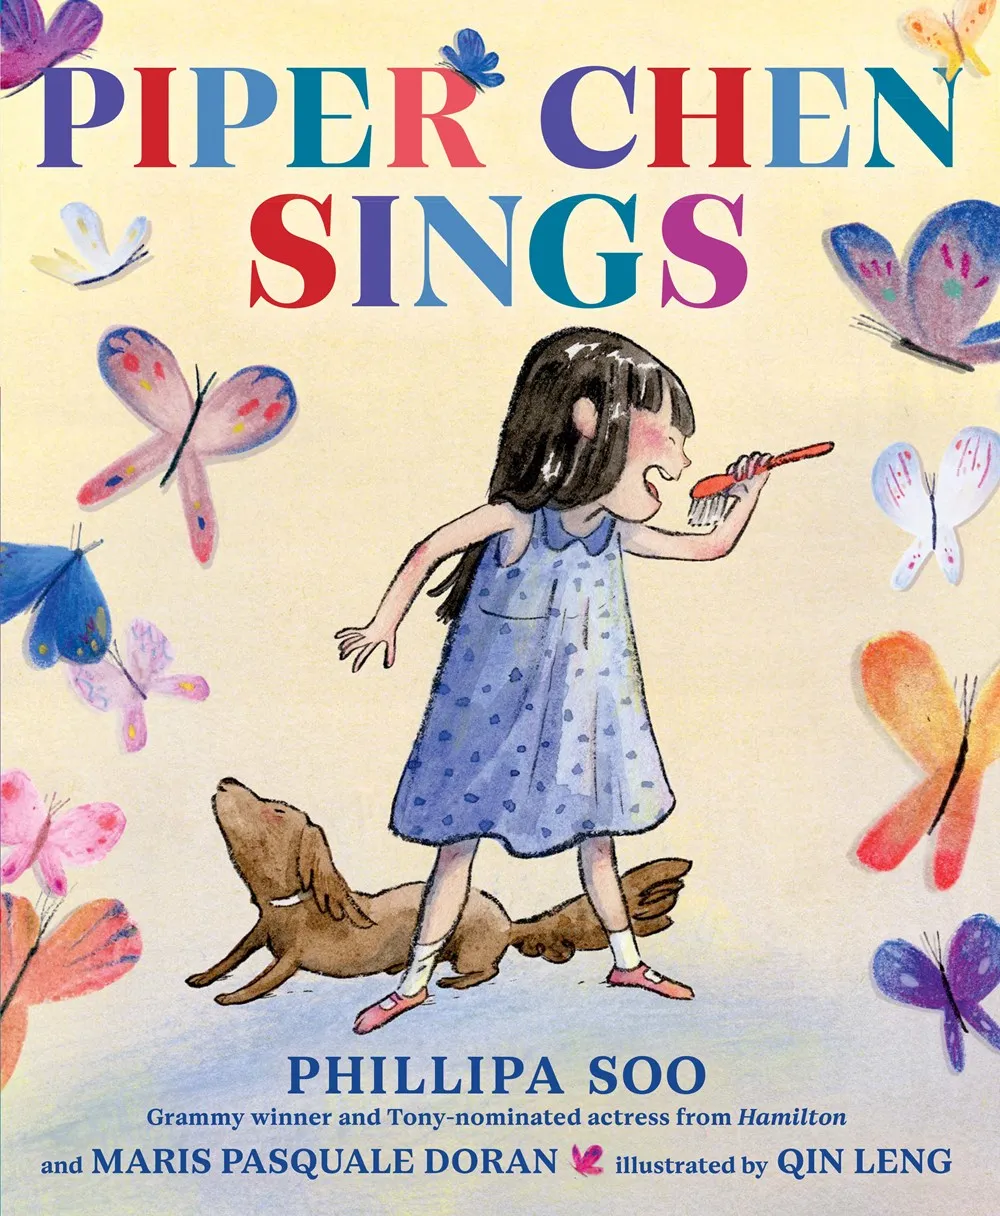 Cover of Piper Chen Sings by Phillipa Soo, Maris Pasquale Doran, & Qin Leng